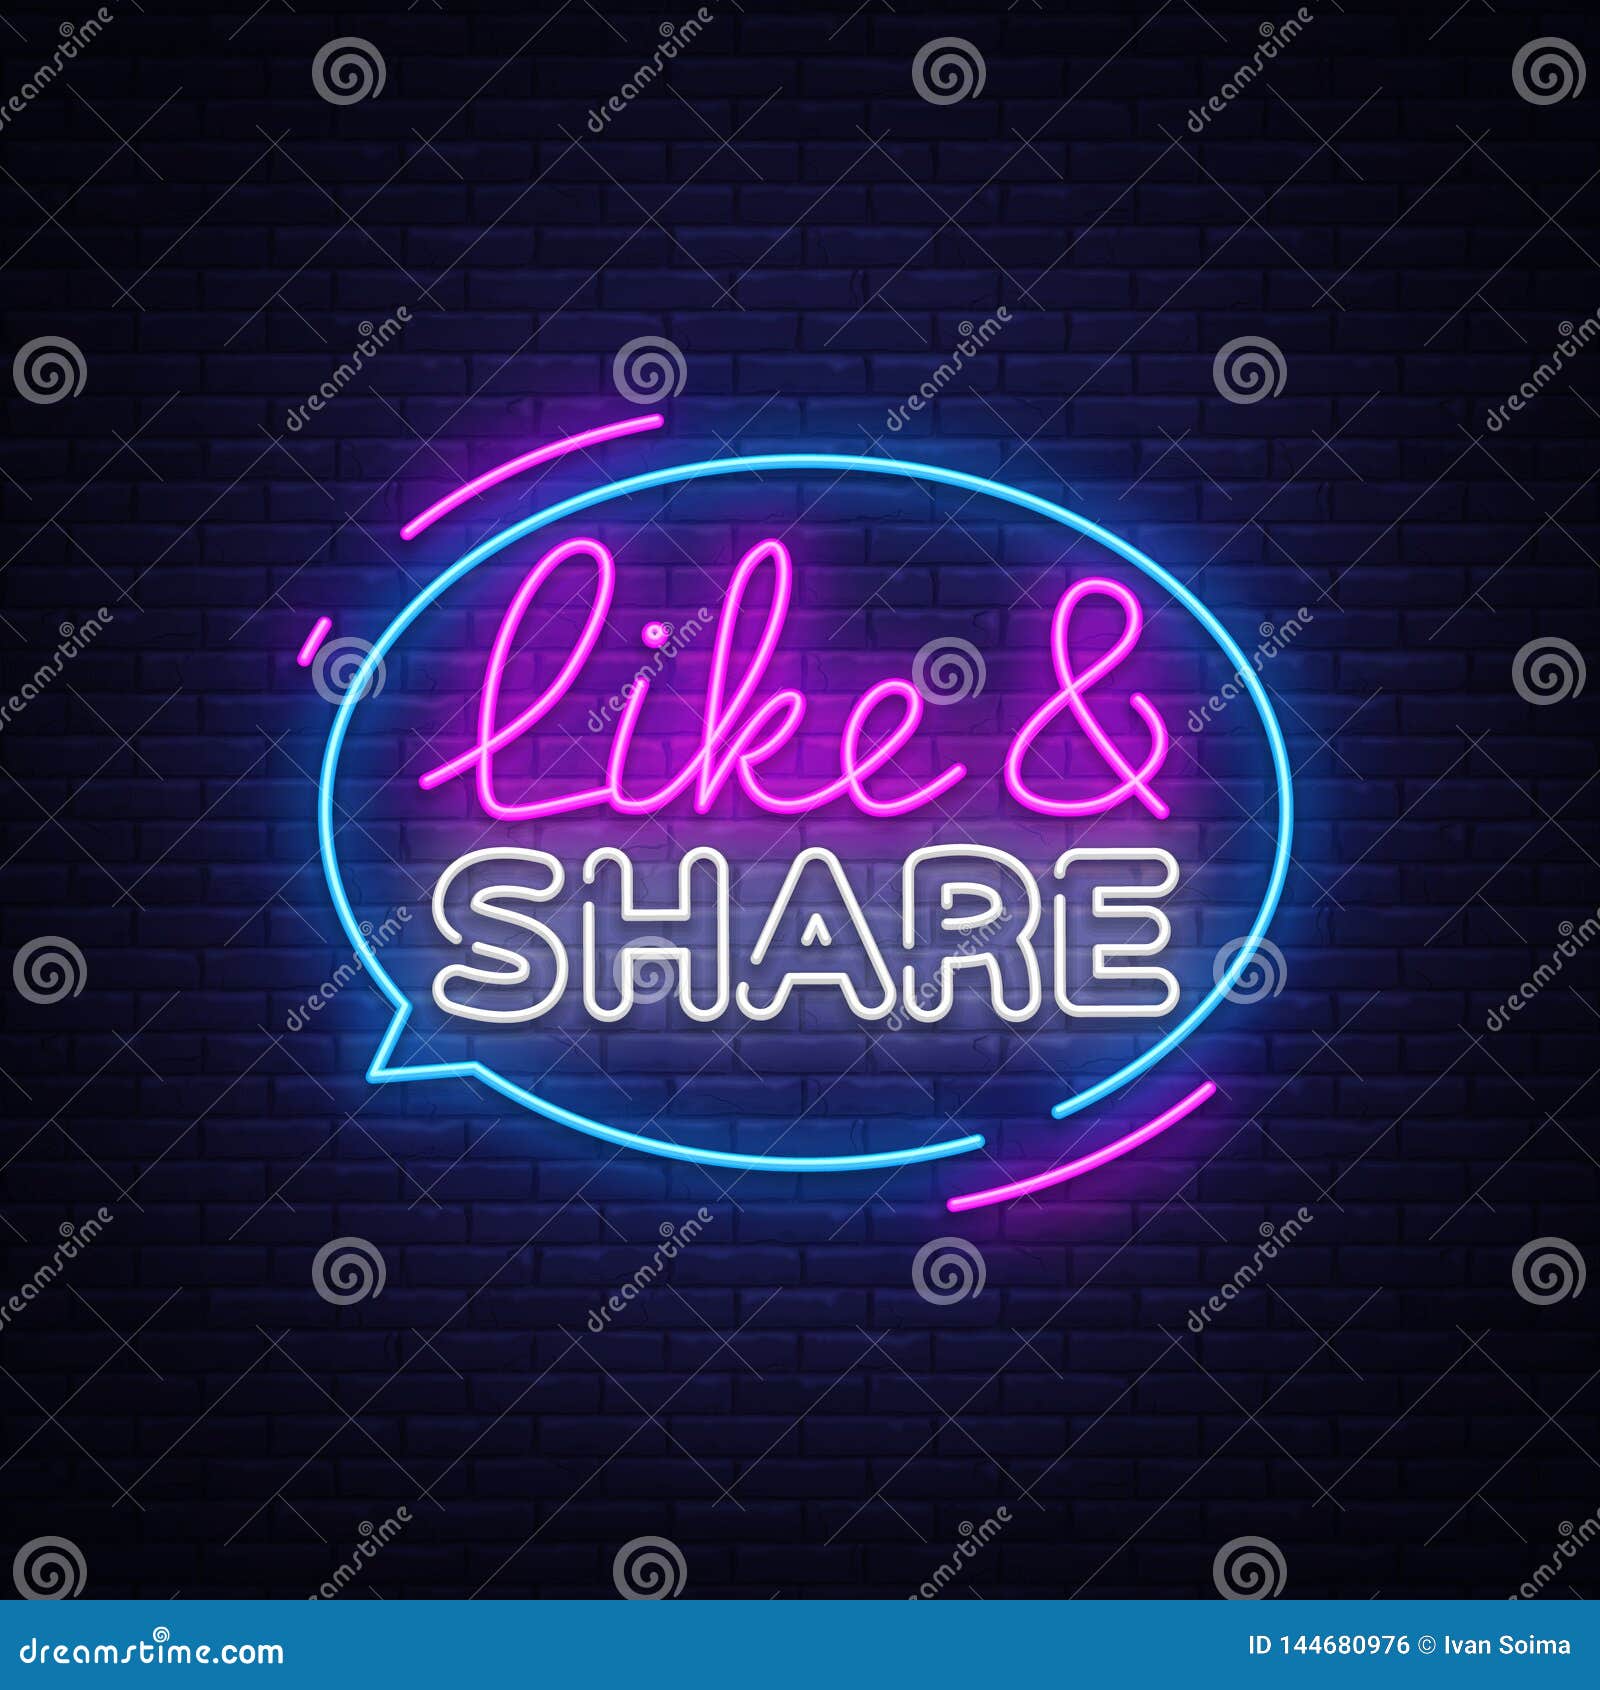 like share neon sign   template. social networks neon text, light banner   colorful modern